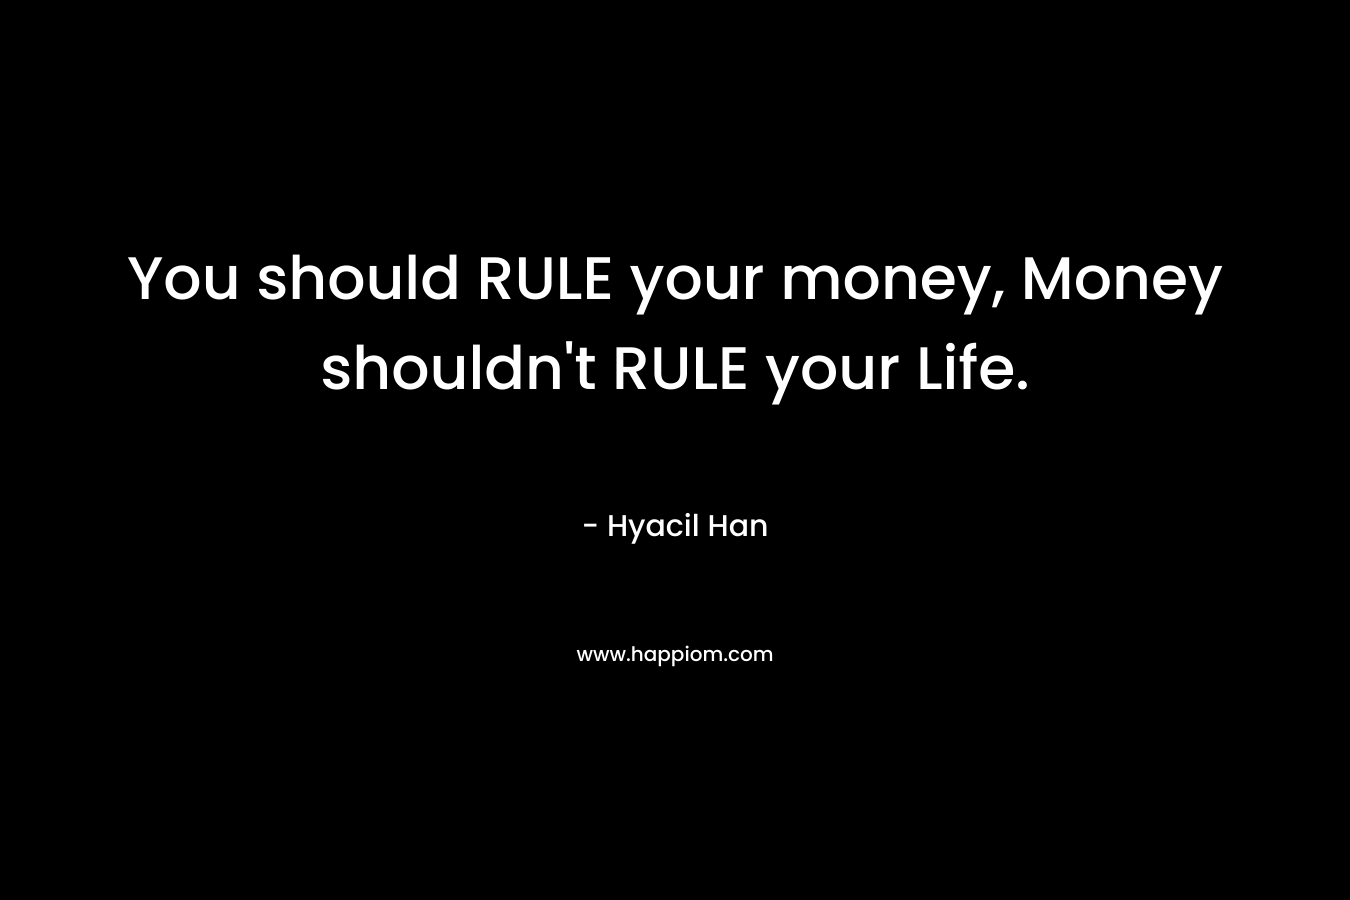 You should RULE your money, Money shouldn’t RULE your Life. – Hyacil Han